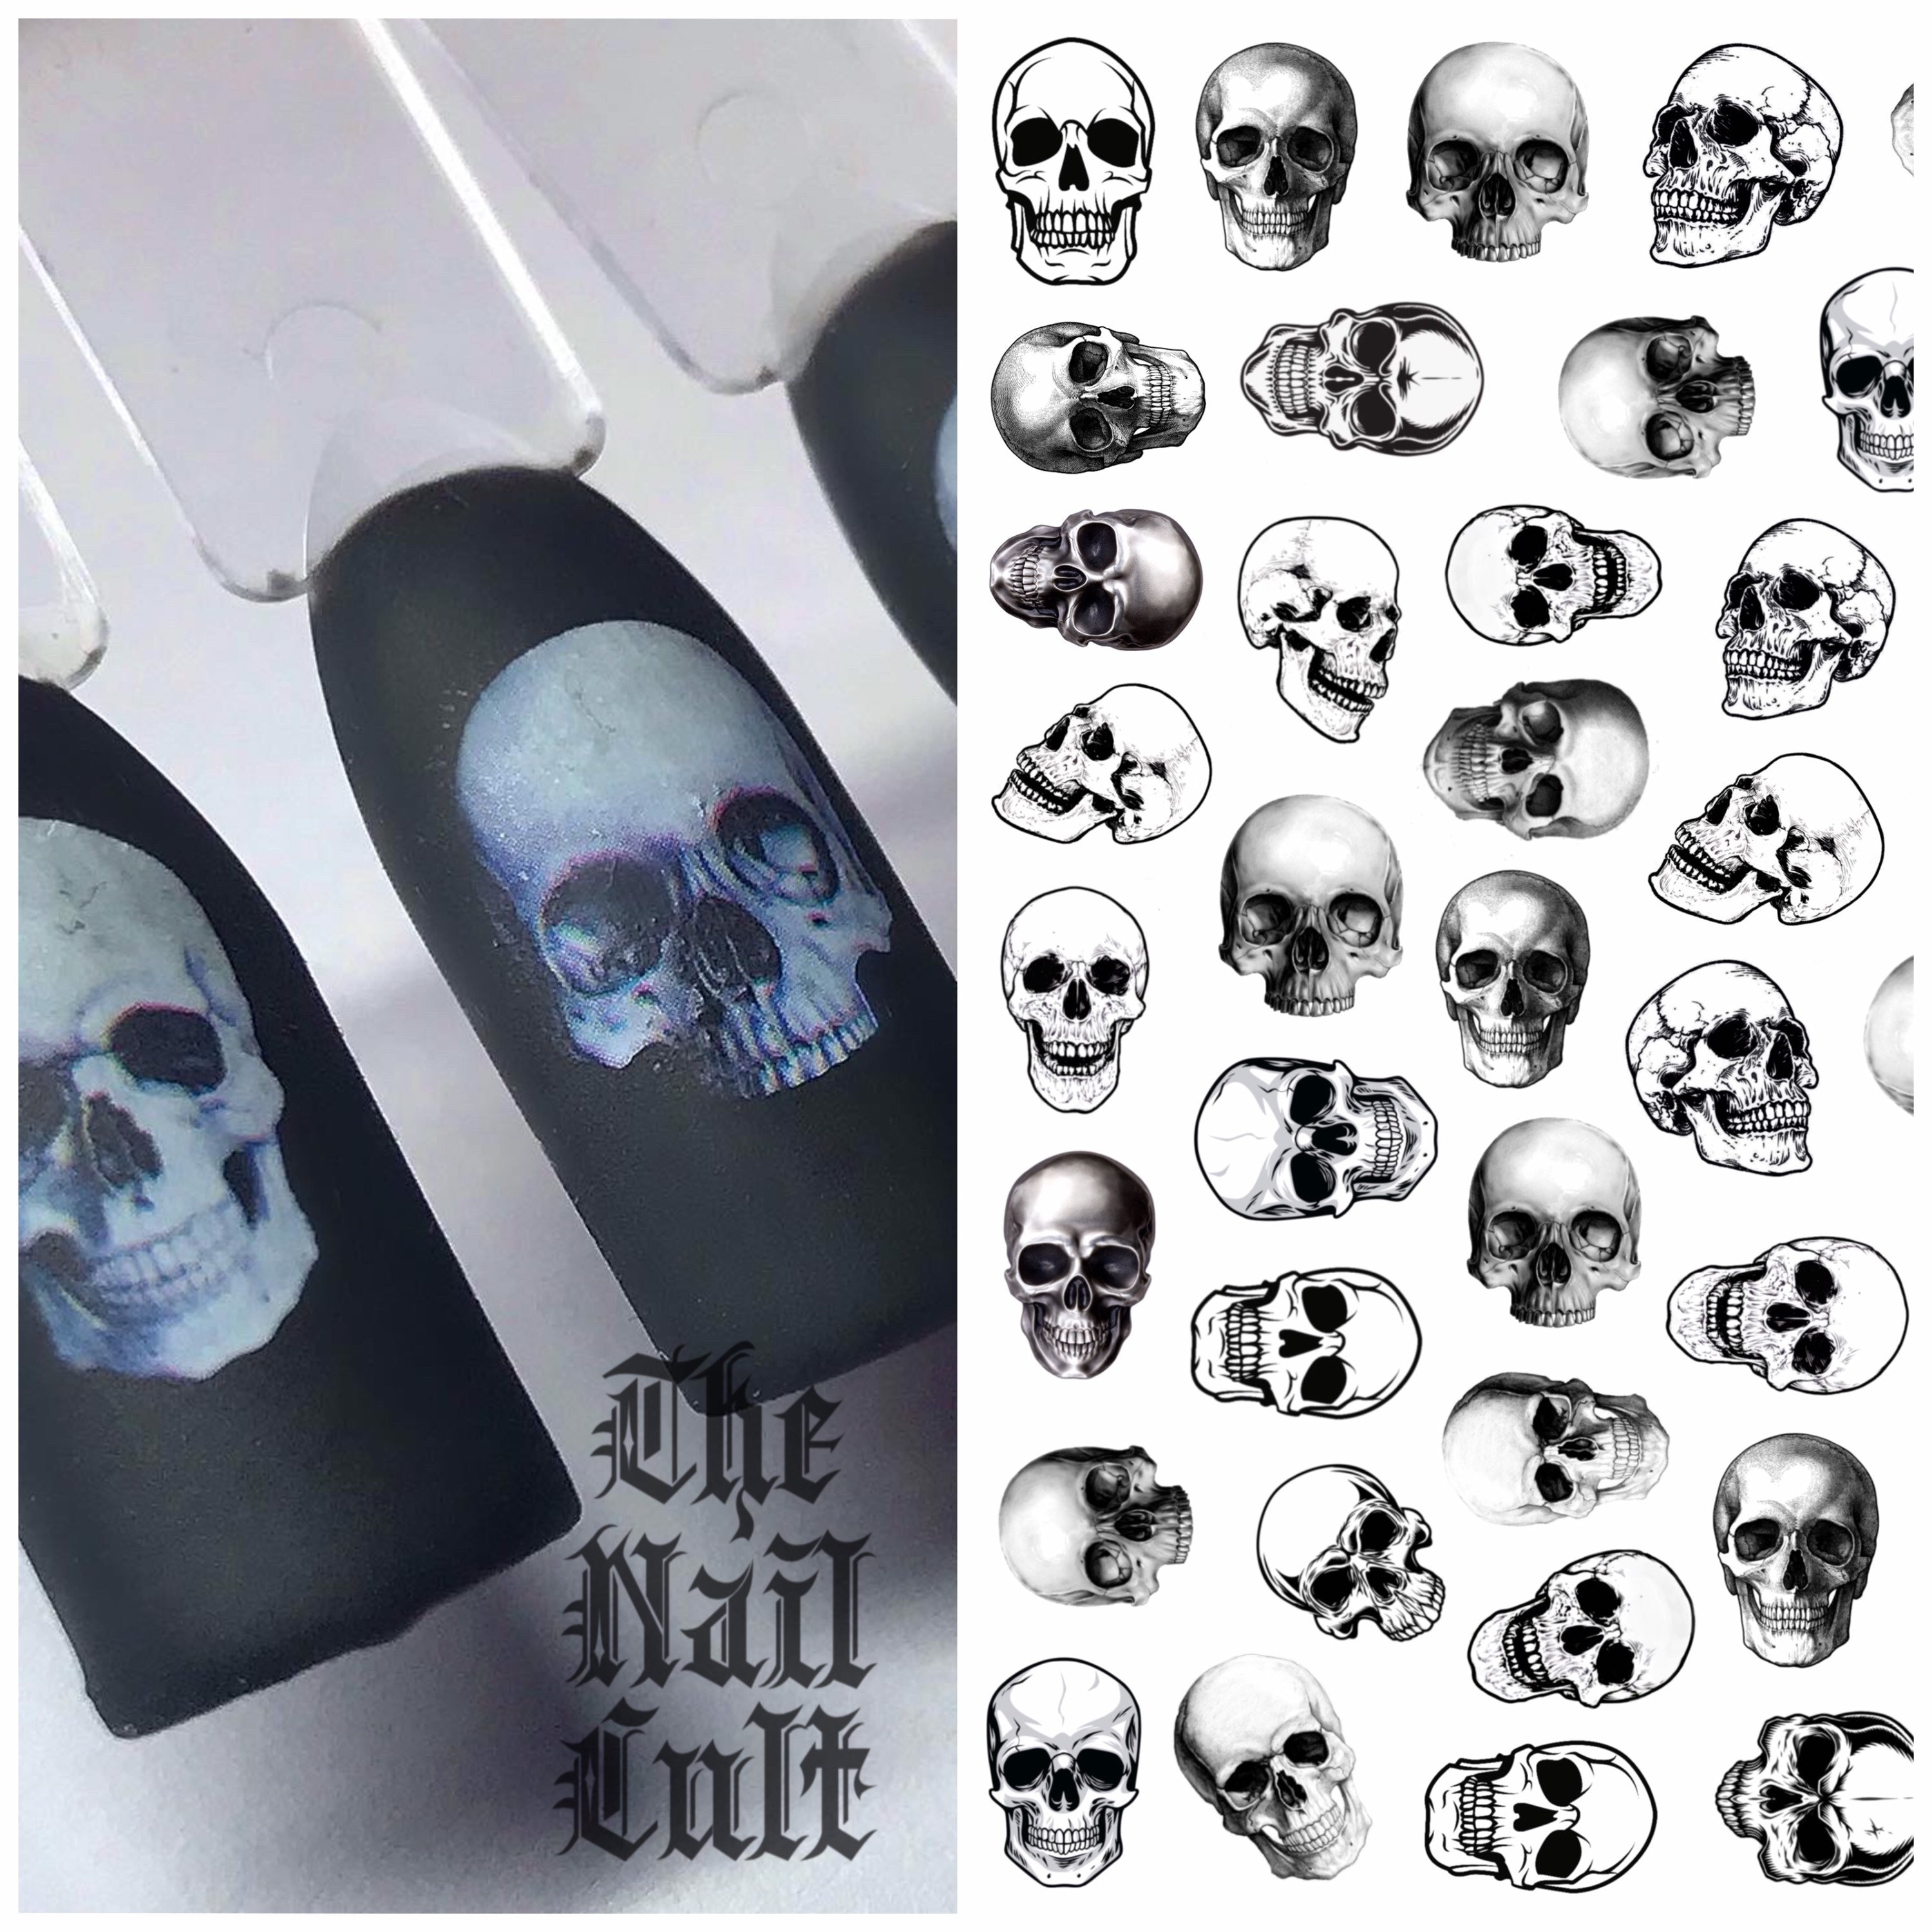 Skull Nail Foils Transfer Stickers, Transfers Foil Nail Art Supplies  Holographic Starry Sky Retro Black Pirate Skeleton Designer Nail Stickers  Decals